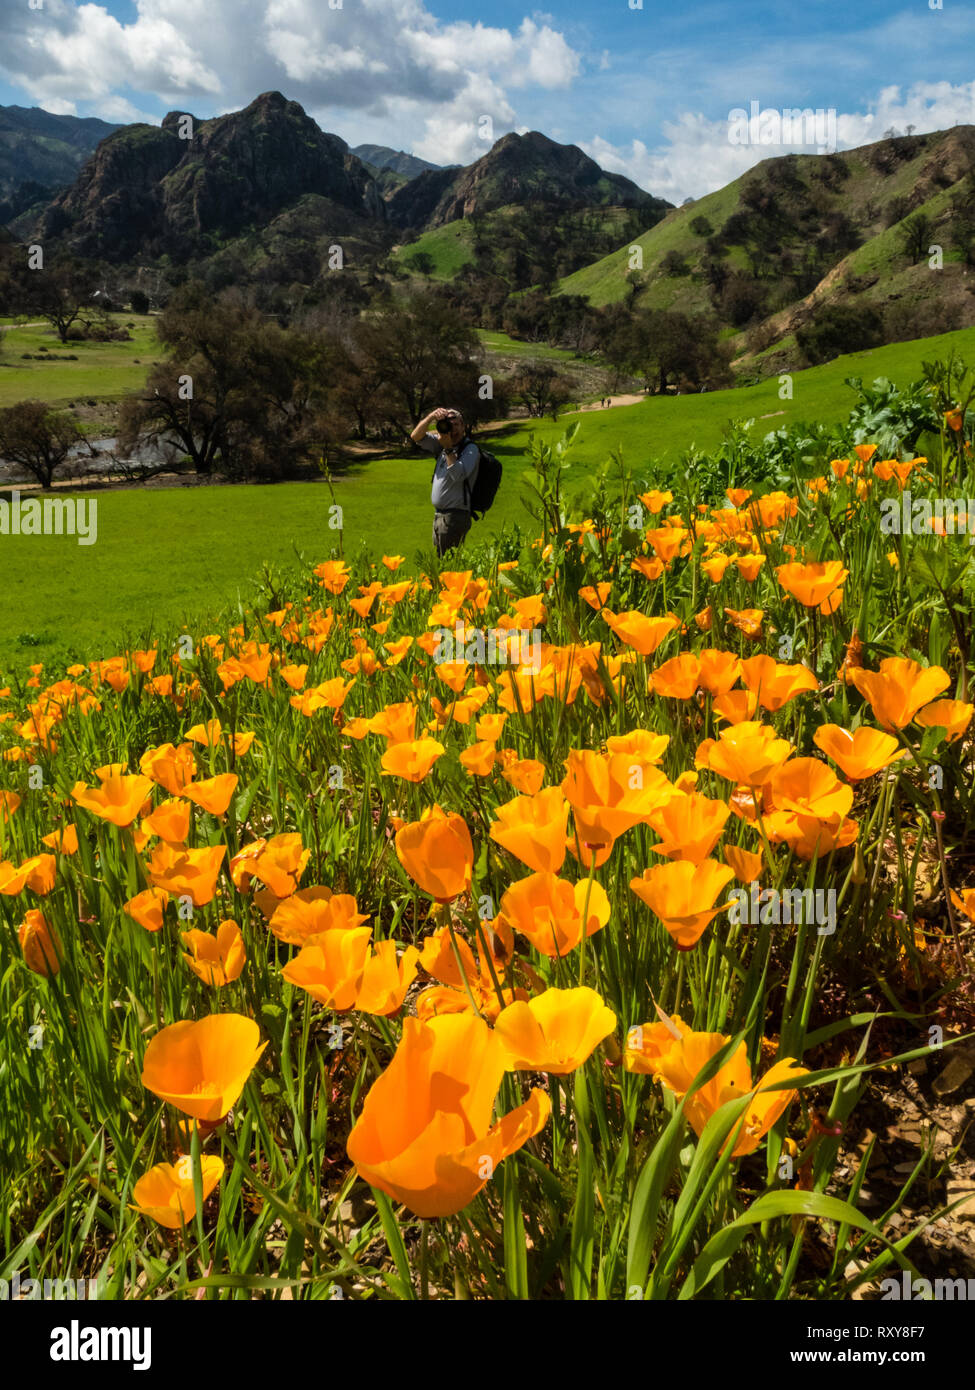 A photographer enjoys the huge fields of California poppies in Malibu Creek State Park, Los Angeles, California after the disastrous Woolsey fire. Stock Photo